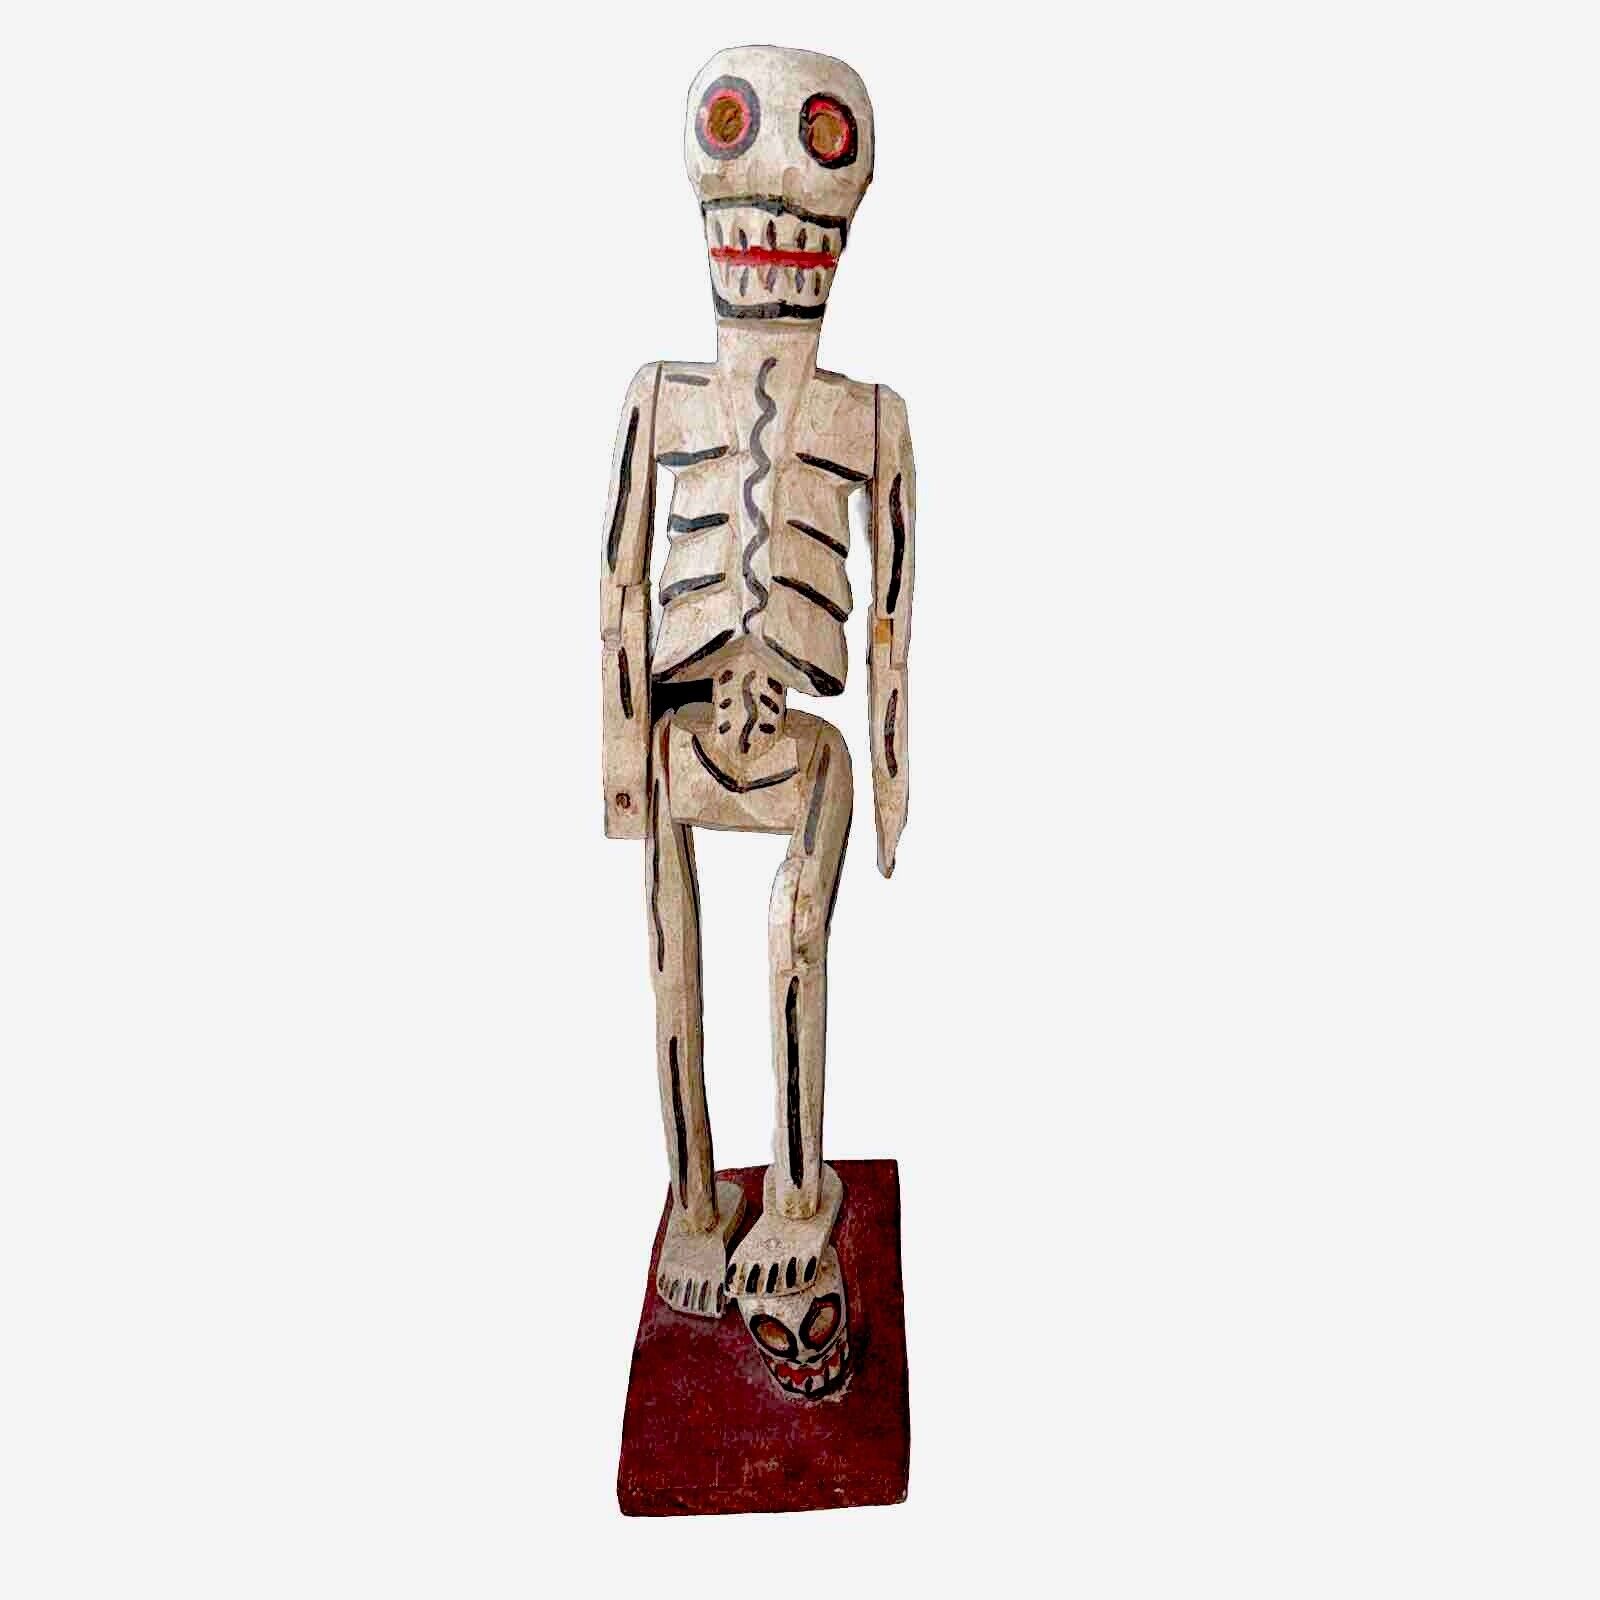 Vtg Hand Carved Folk Art Wood Skeleton Jointed DAY OF THE DEAD Oaxacan